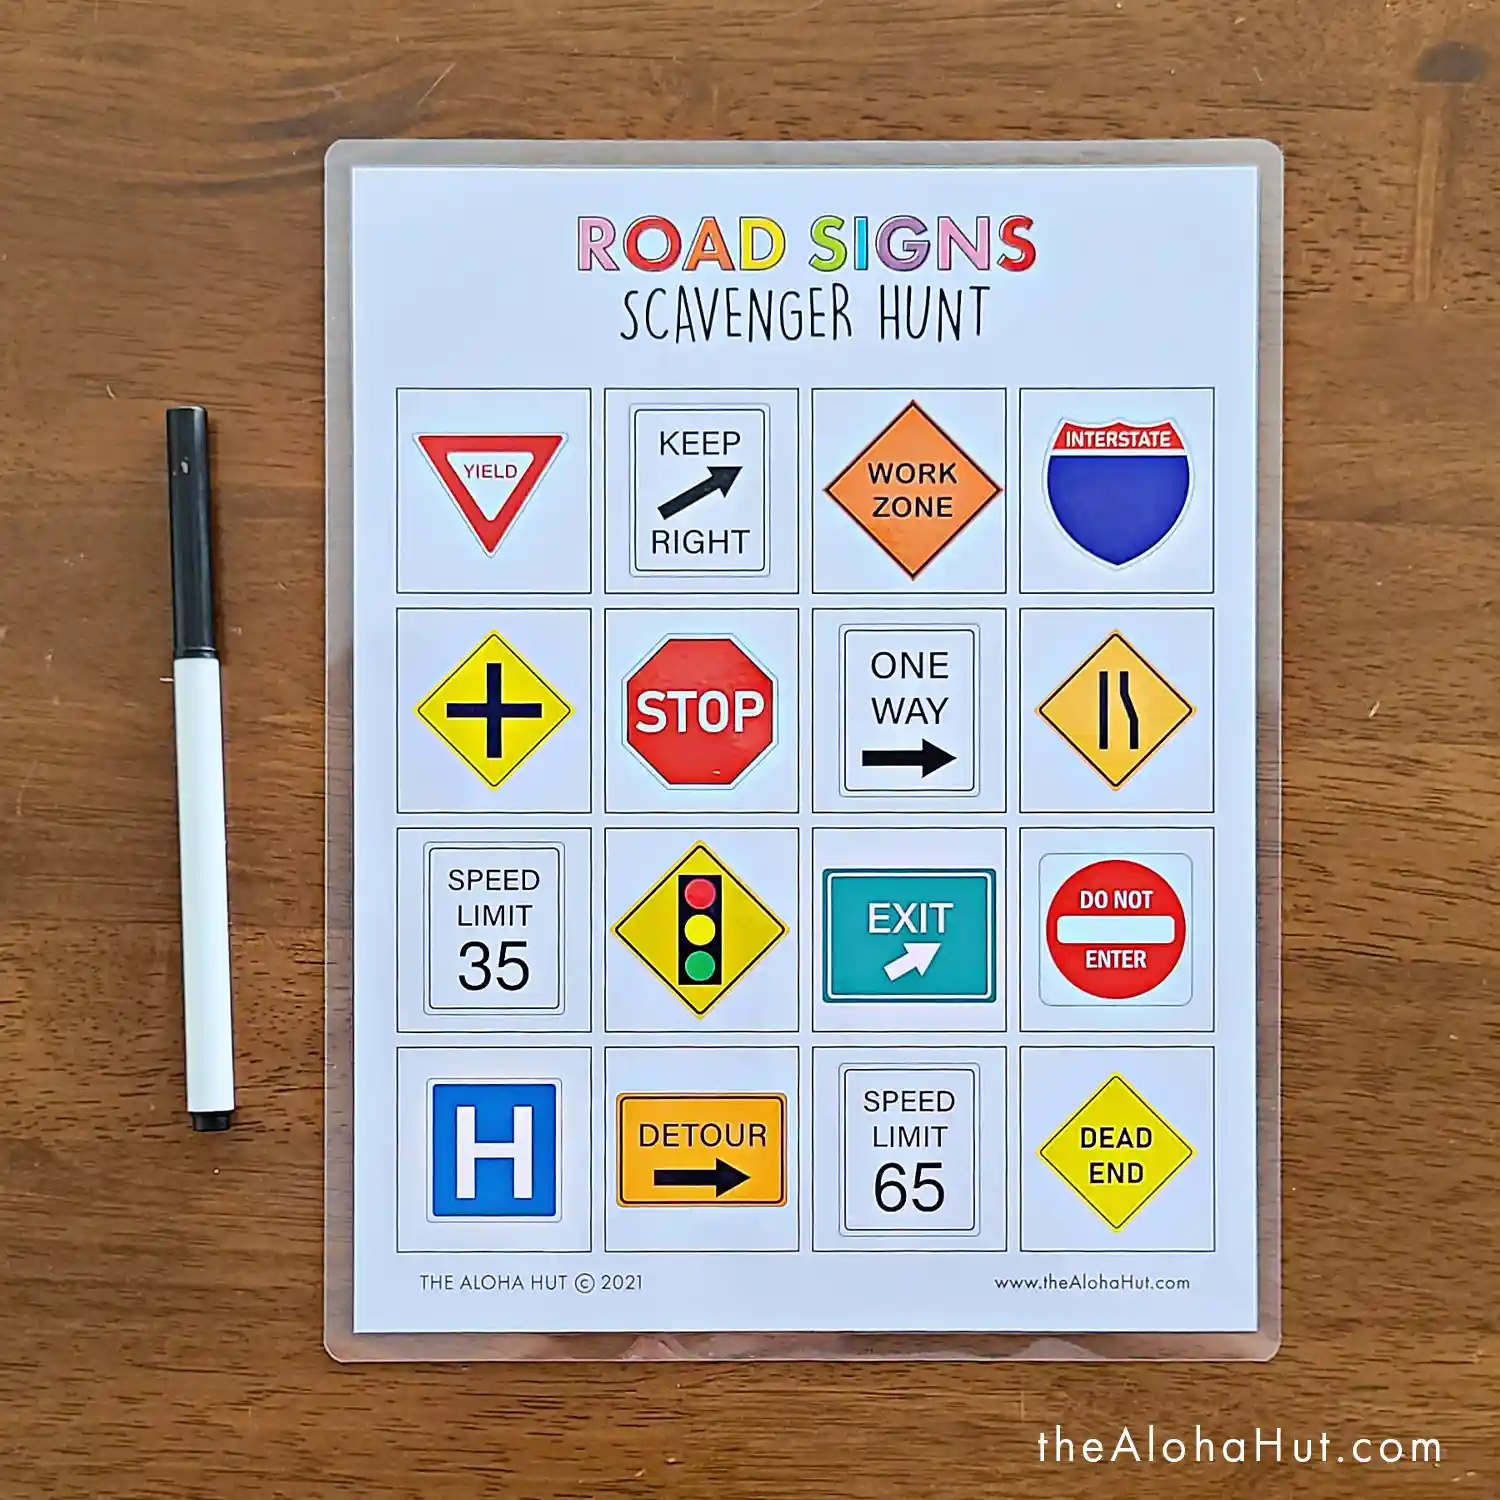 DIY Portable Road Trip Kits - 10 Free Printable Activity Pages - Travel Games - Road Signs Scavenger Hunt